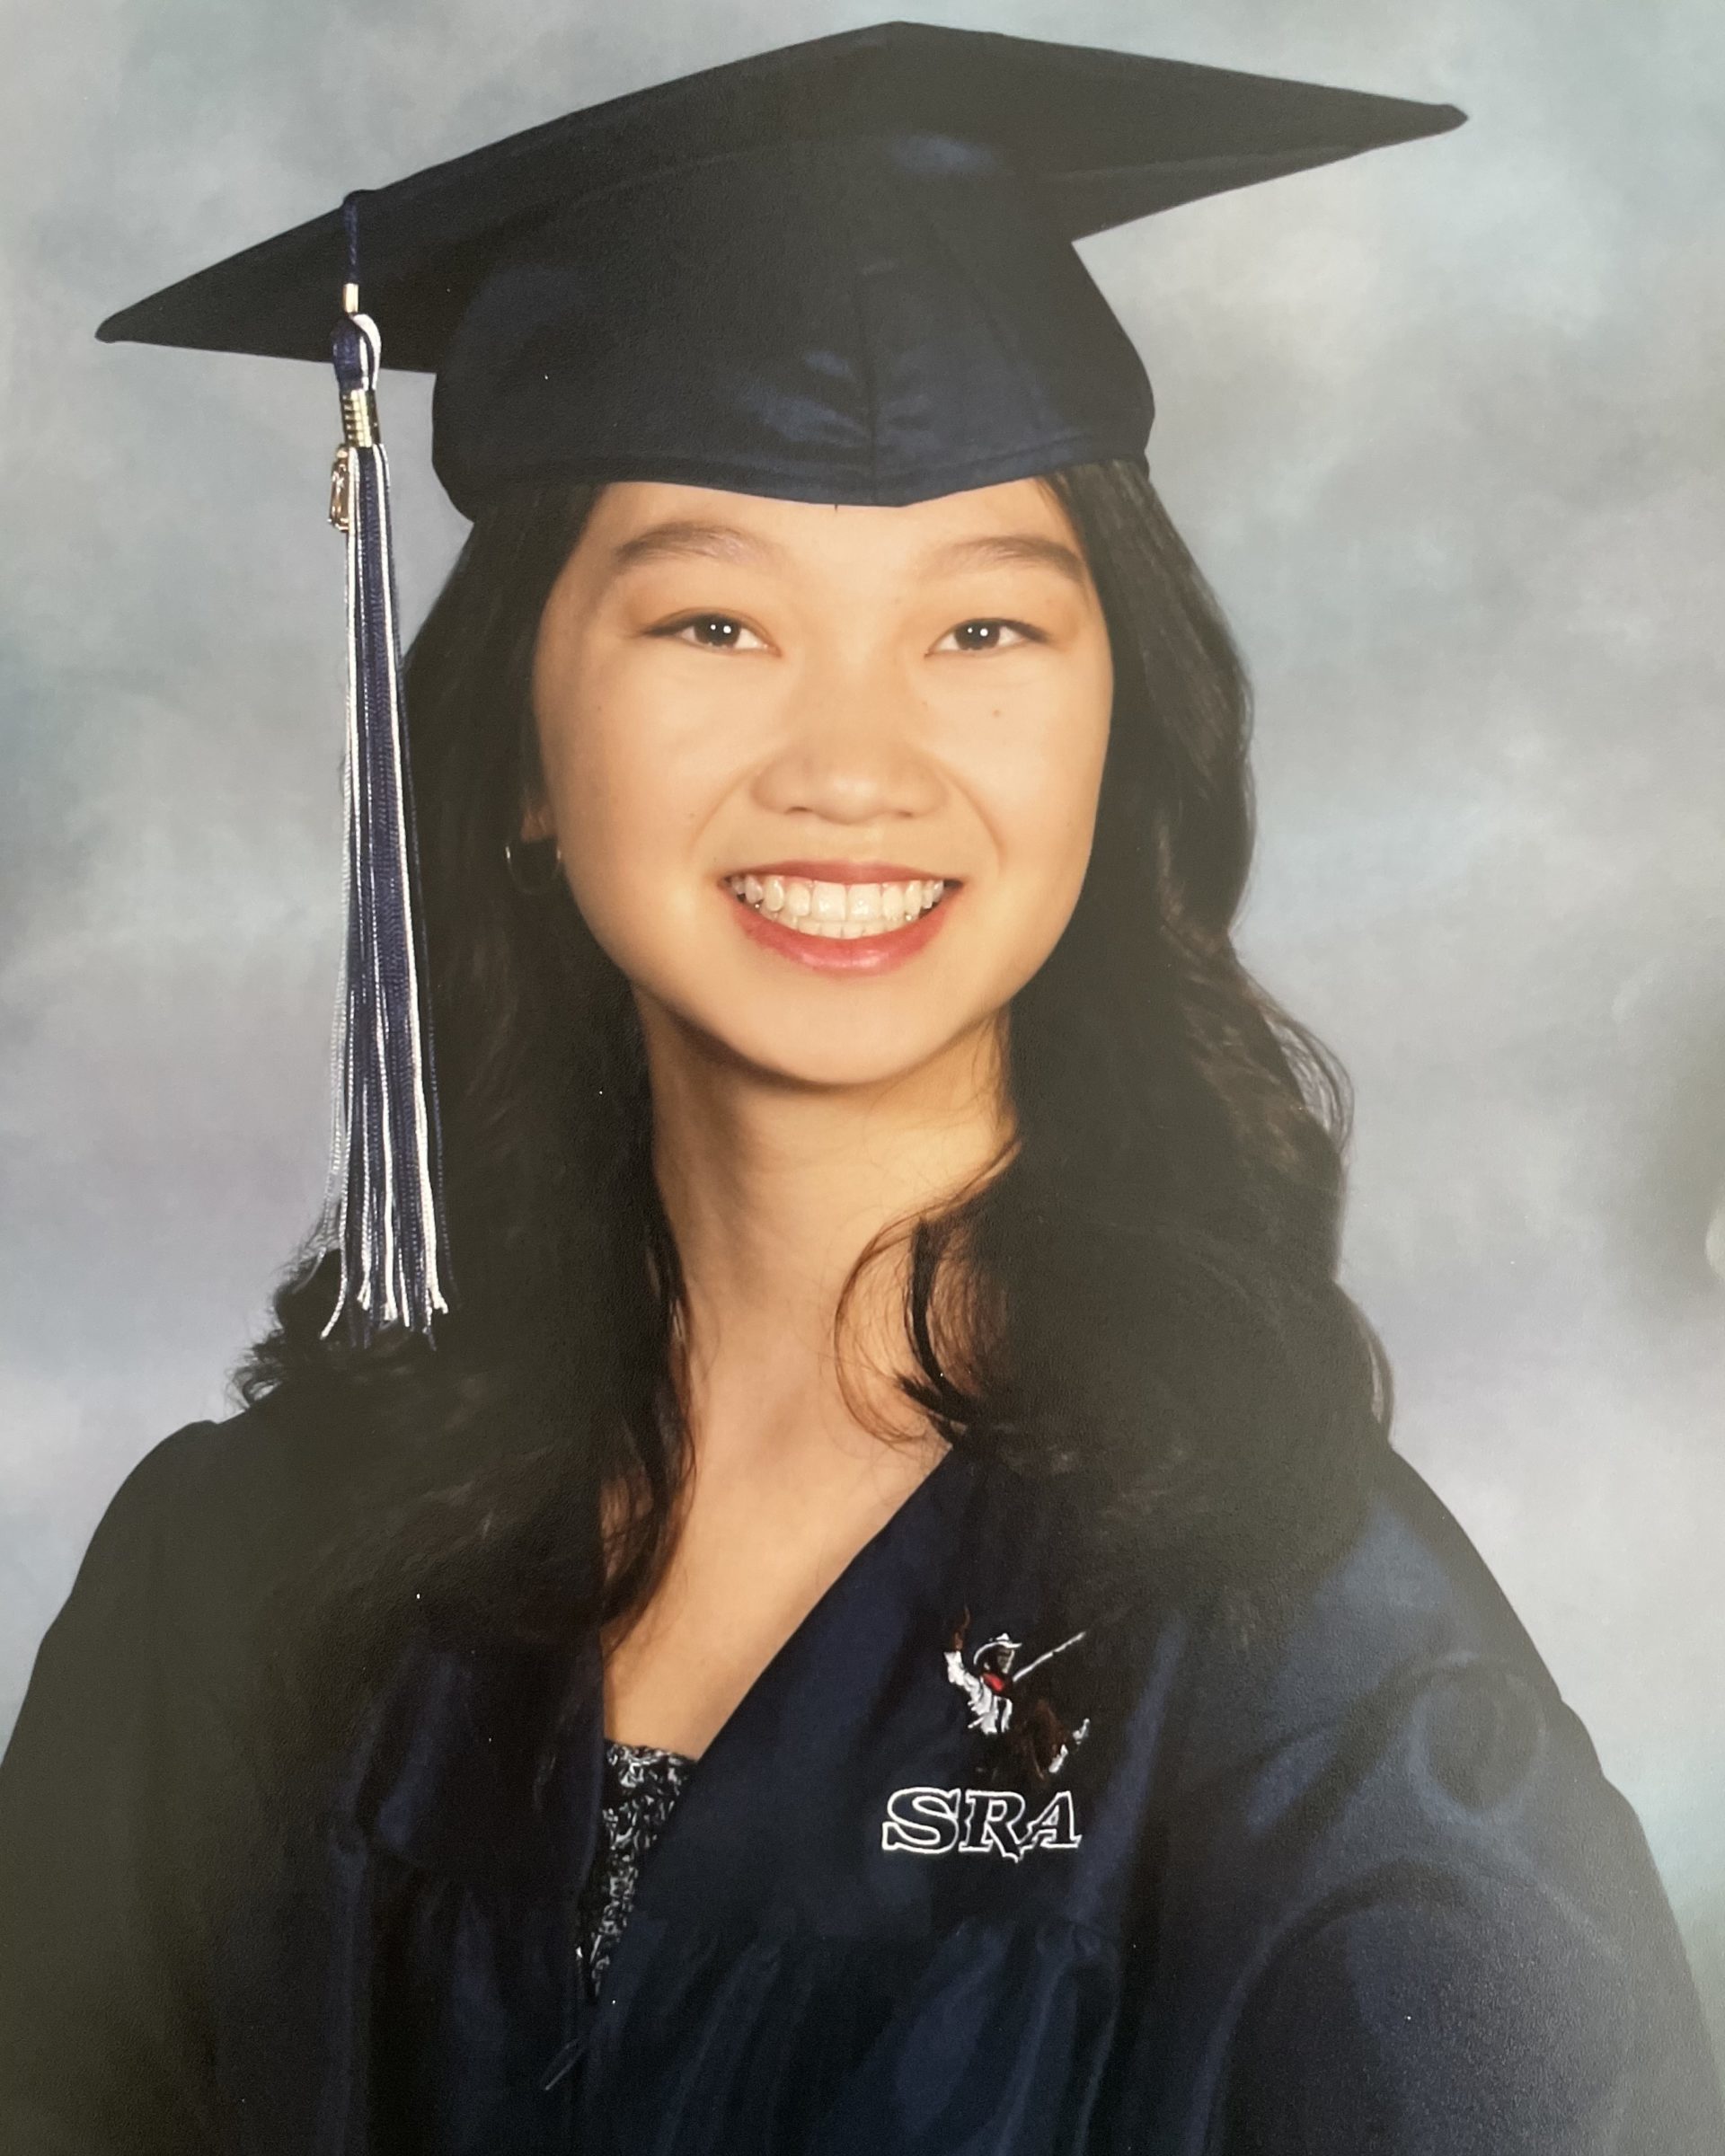 smiling girl wearing navy graduation gown and cap